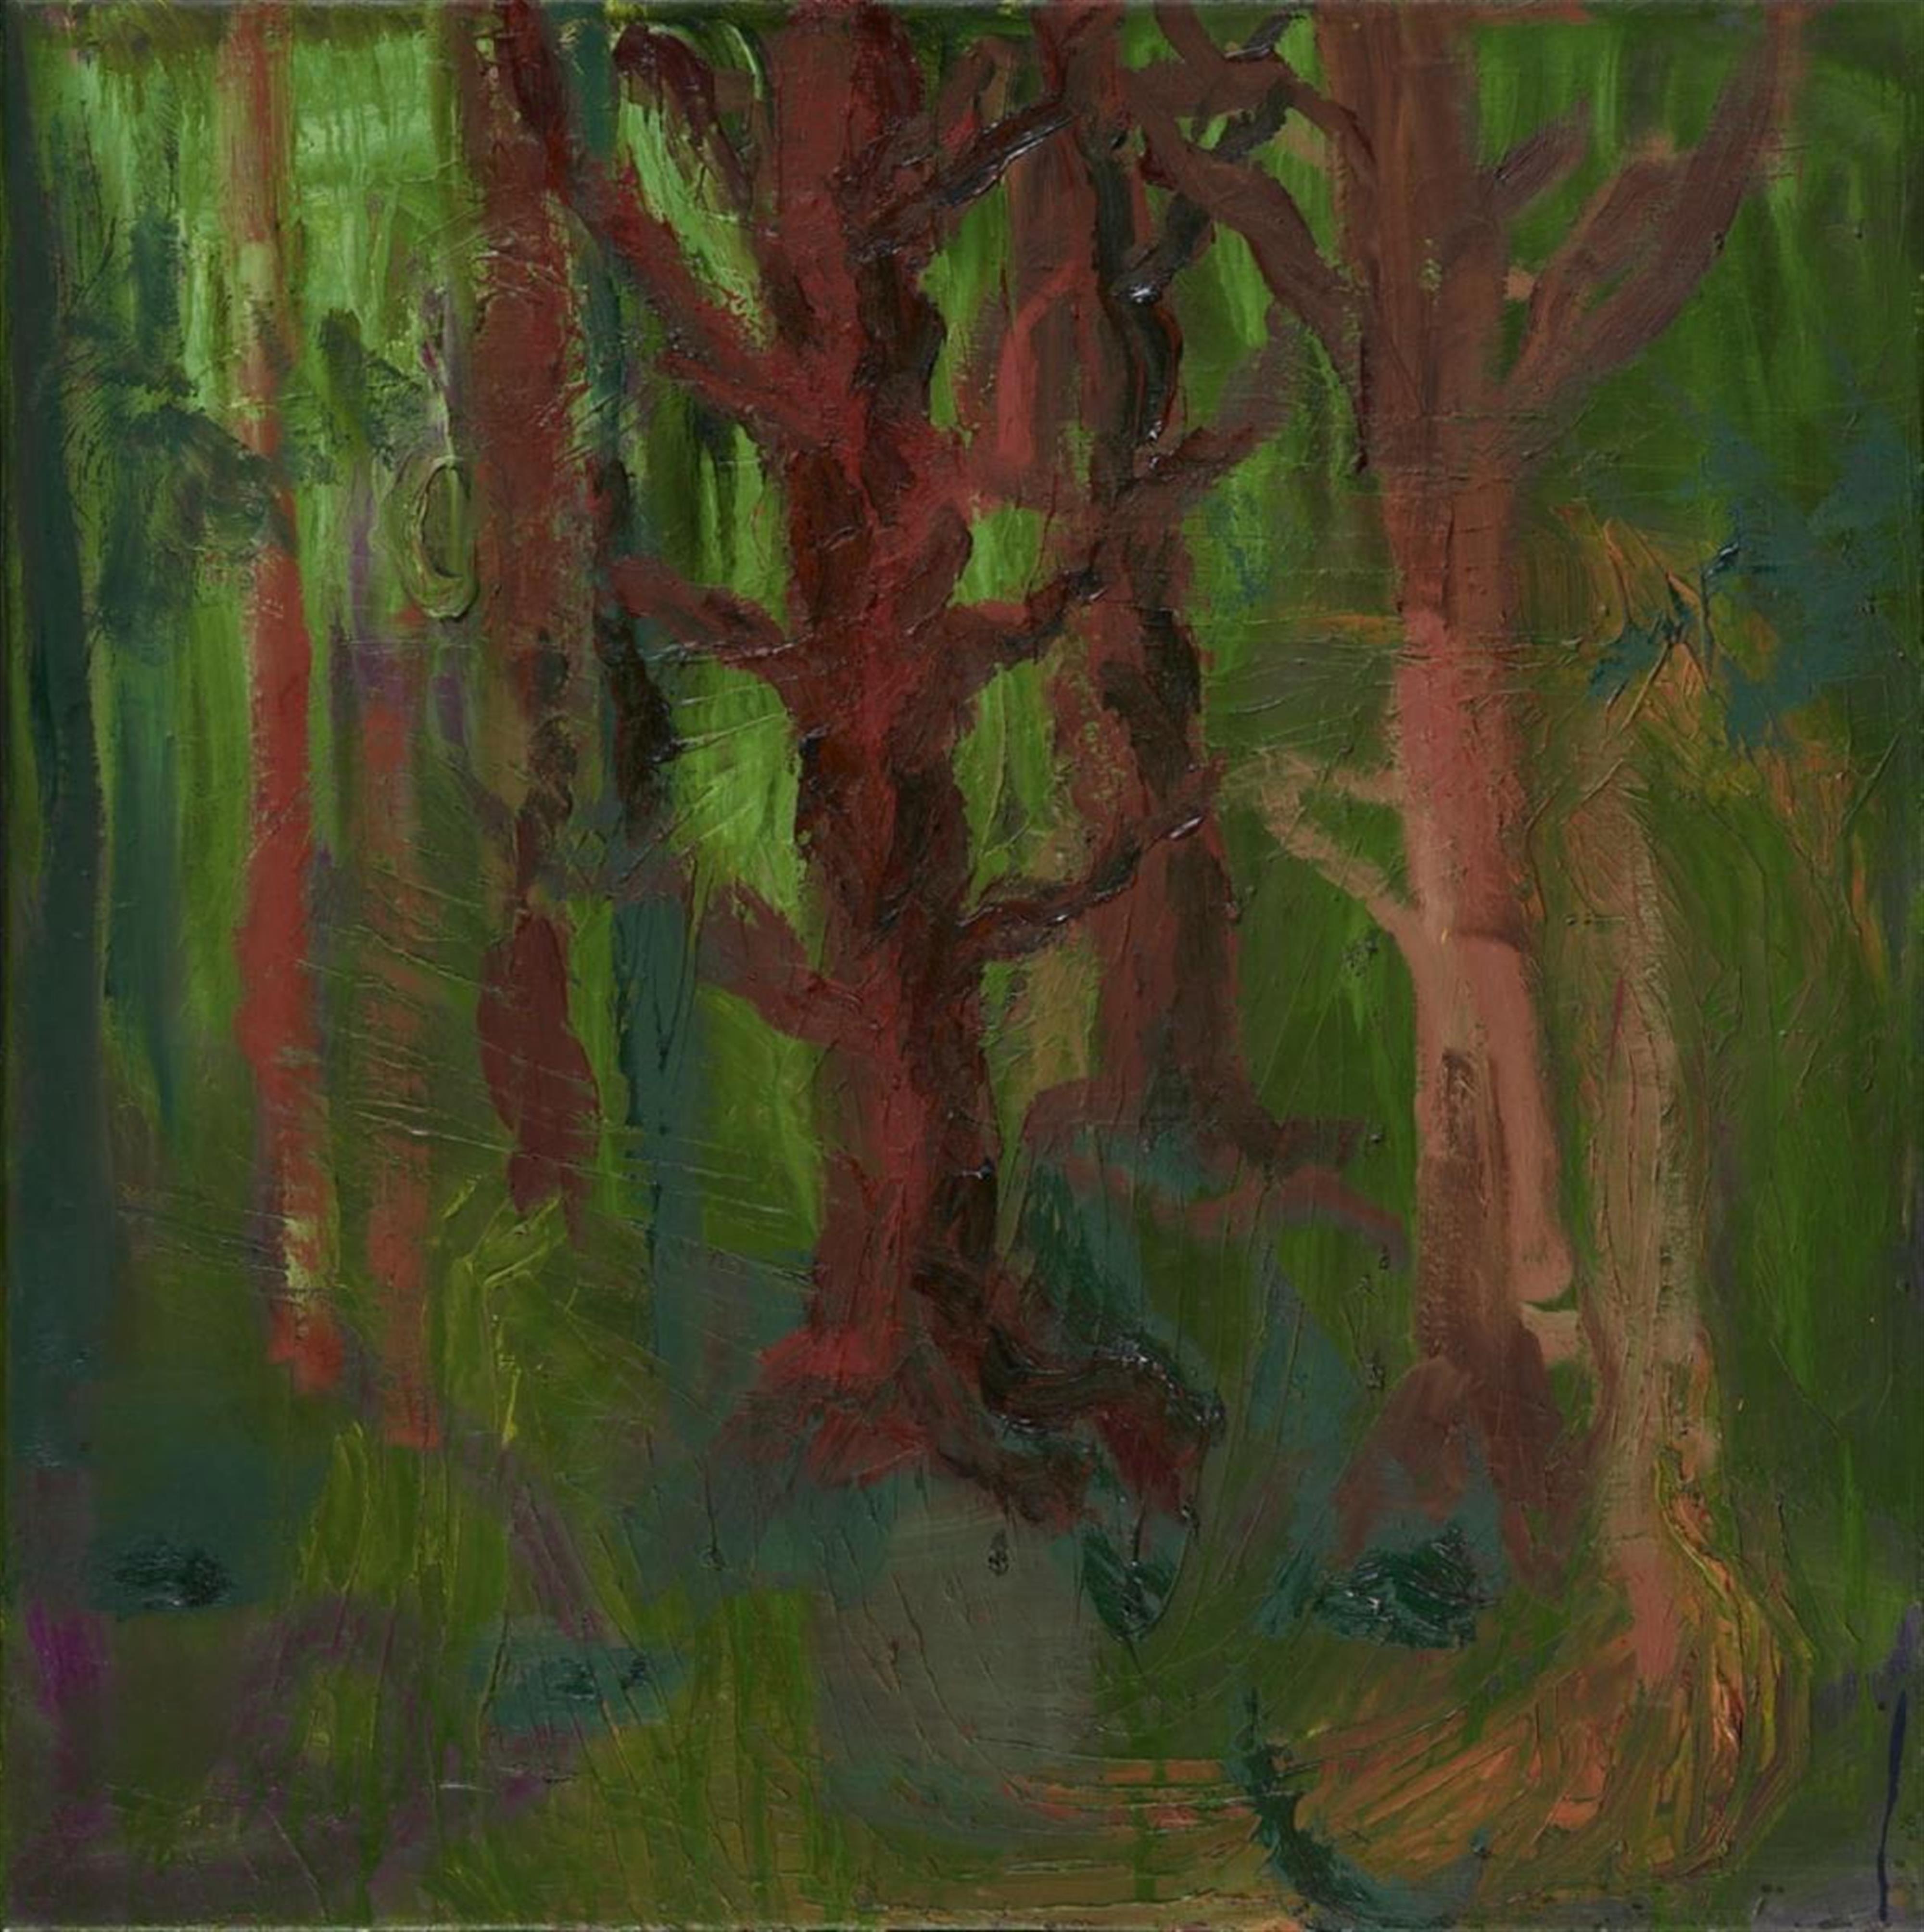 Rainer Fetting - Kleiner Wald (Small Woods) - image-1